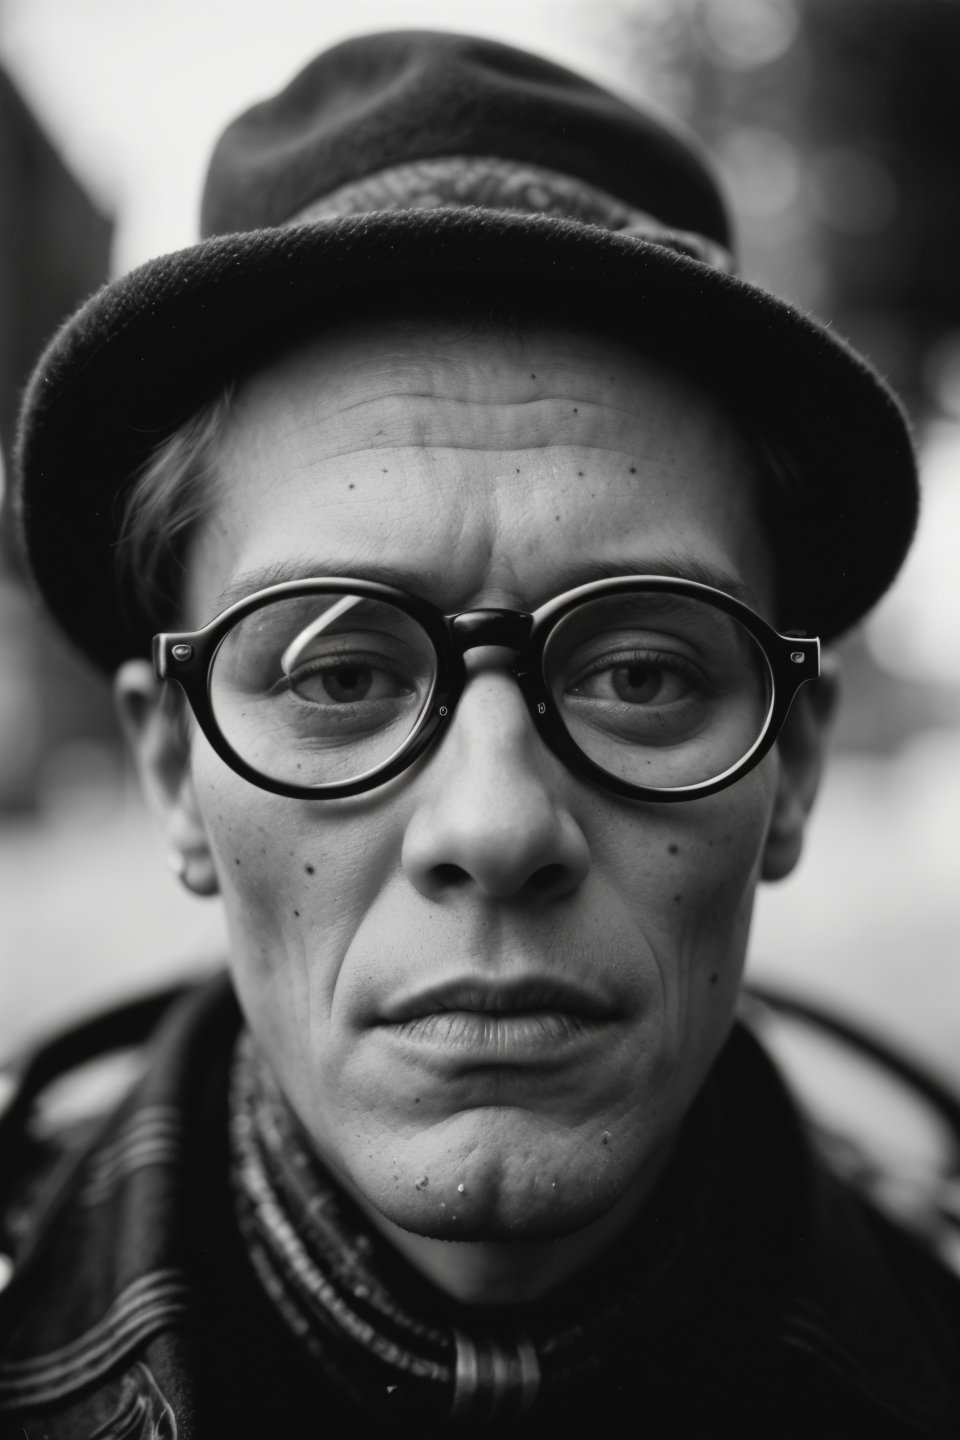 photograph, portrait, surreal, close up of a Temol, Glasses, Horror, Decopunk, High Shutter Speed, Fomapan 400, Depth of field 100mm, intricate detailed face, (designed by Jamie Hawkesworth:1.3) , William S. Burroughs, cityscape, elaborate, macabre